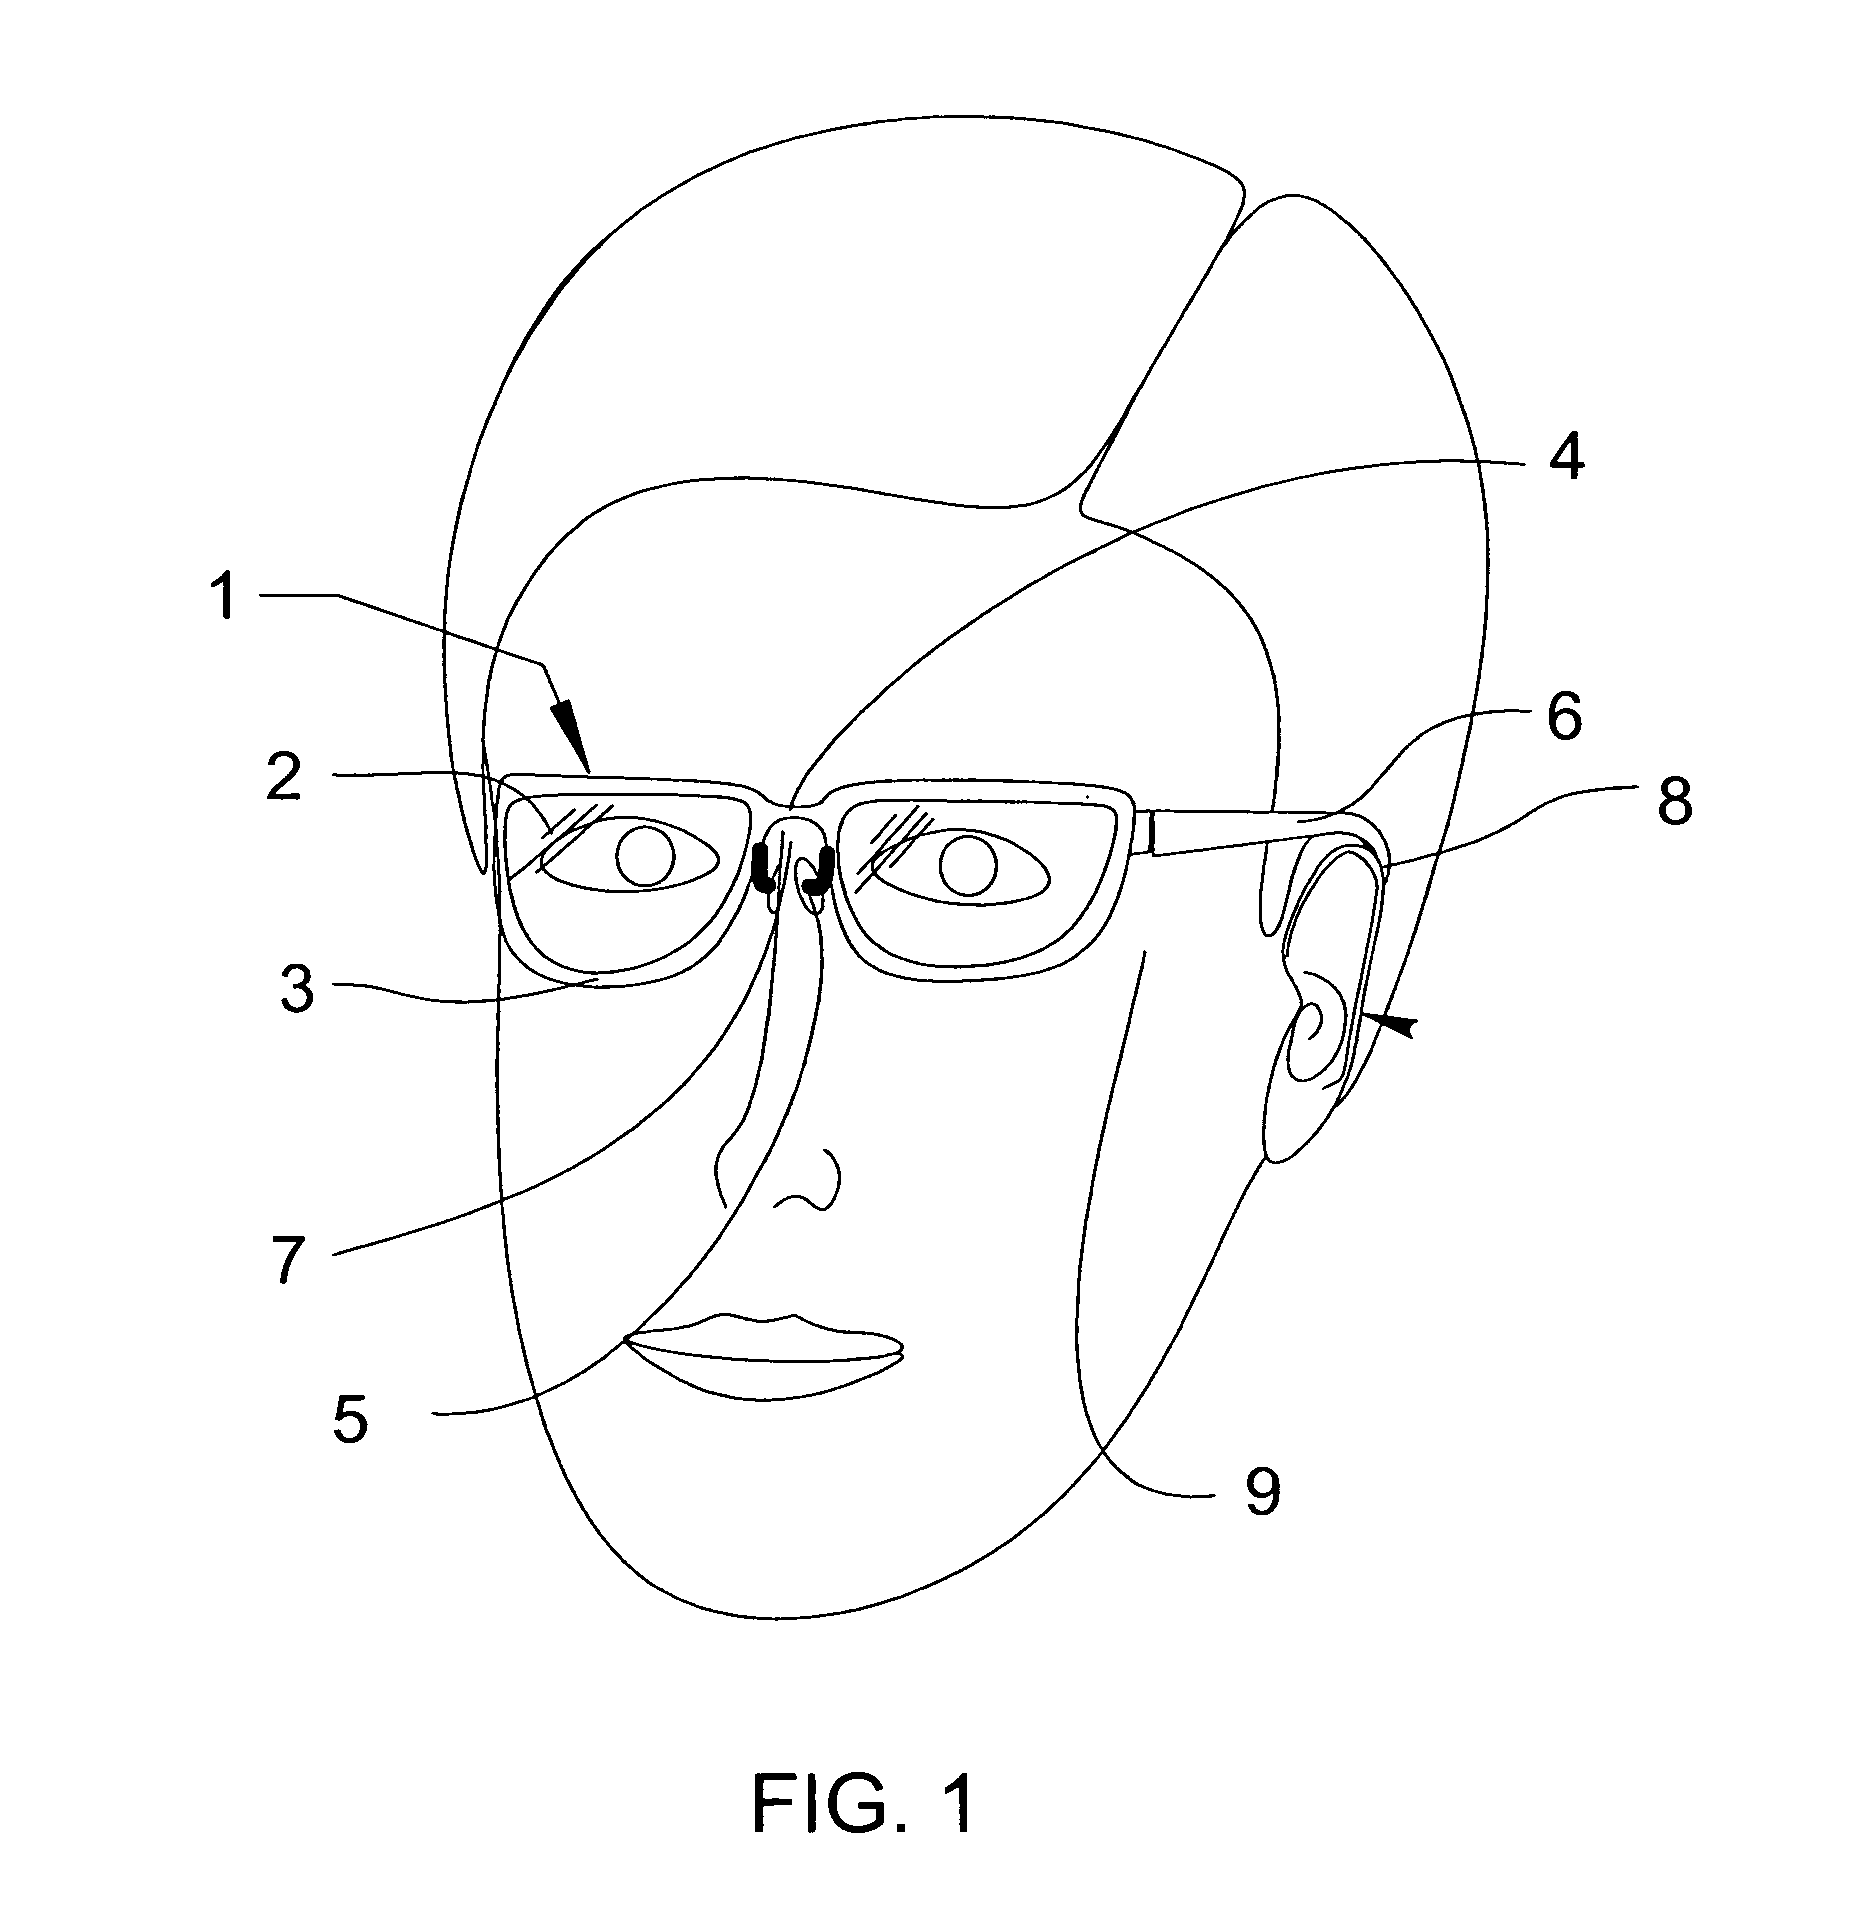 Eyeglasses with extension member supports